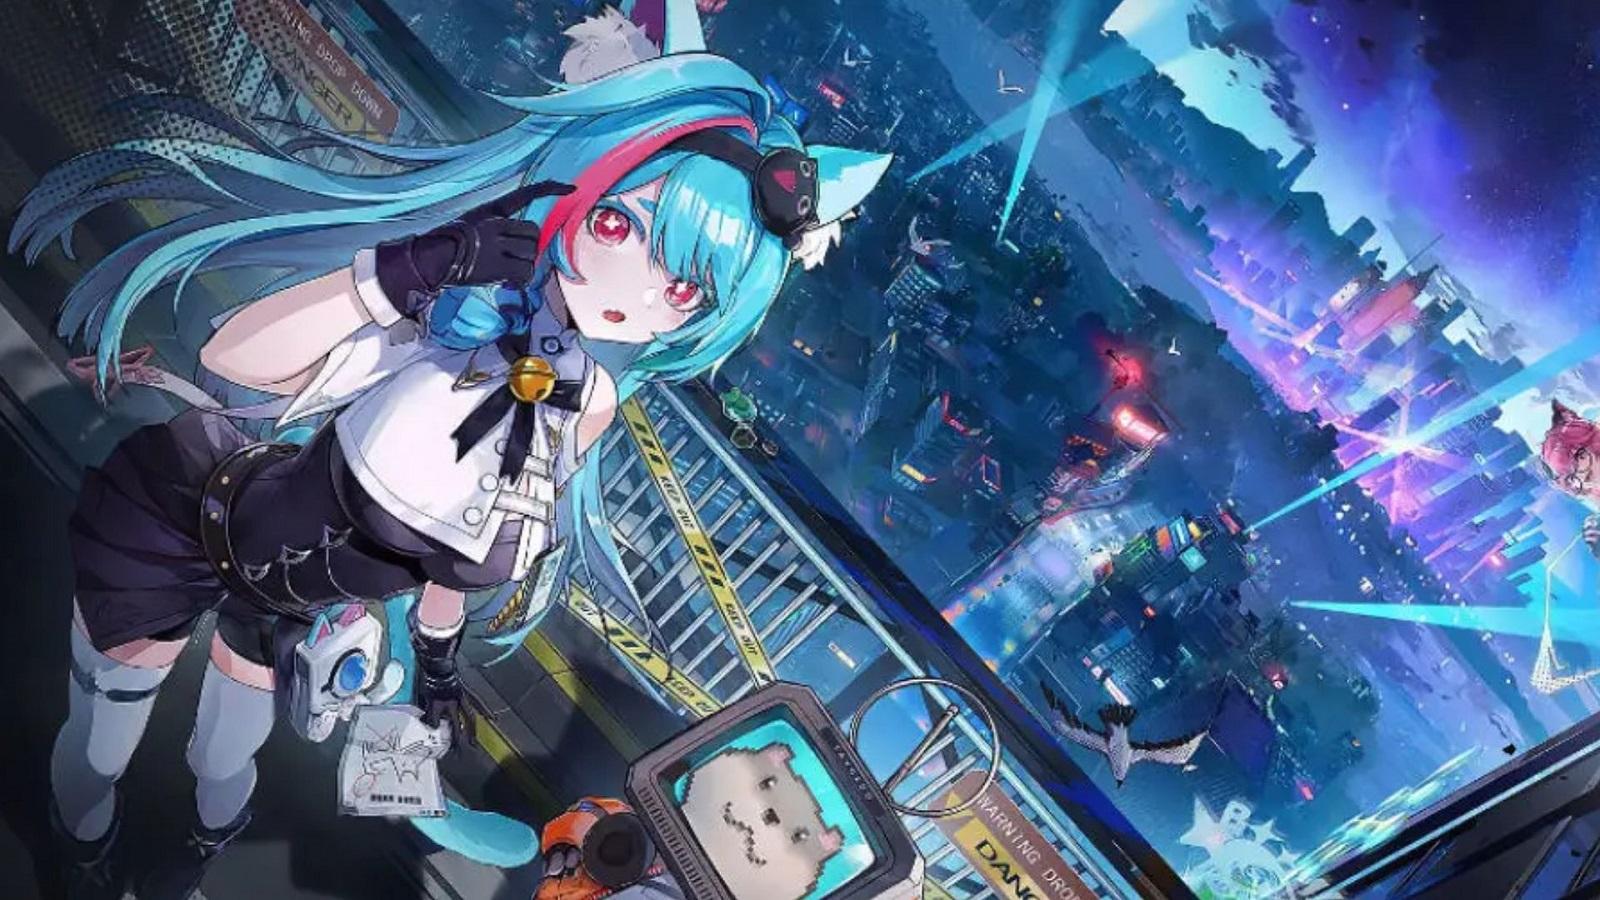 Anime girl with blue hair in a city